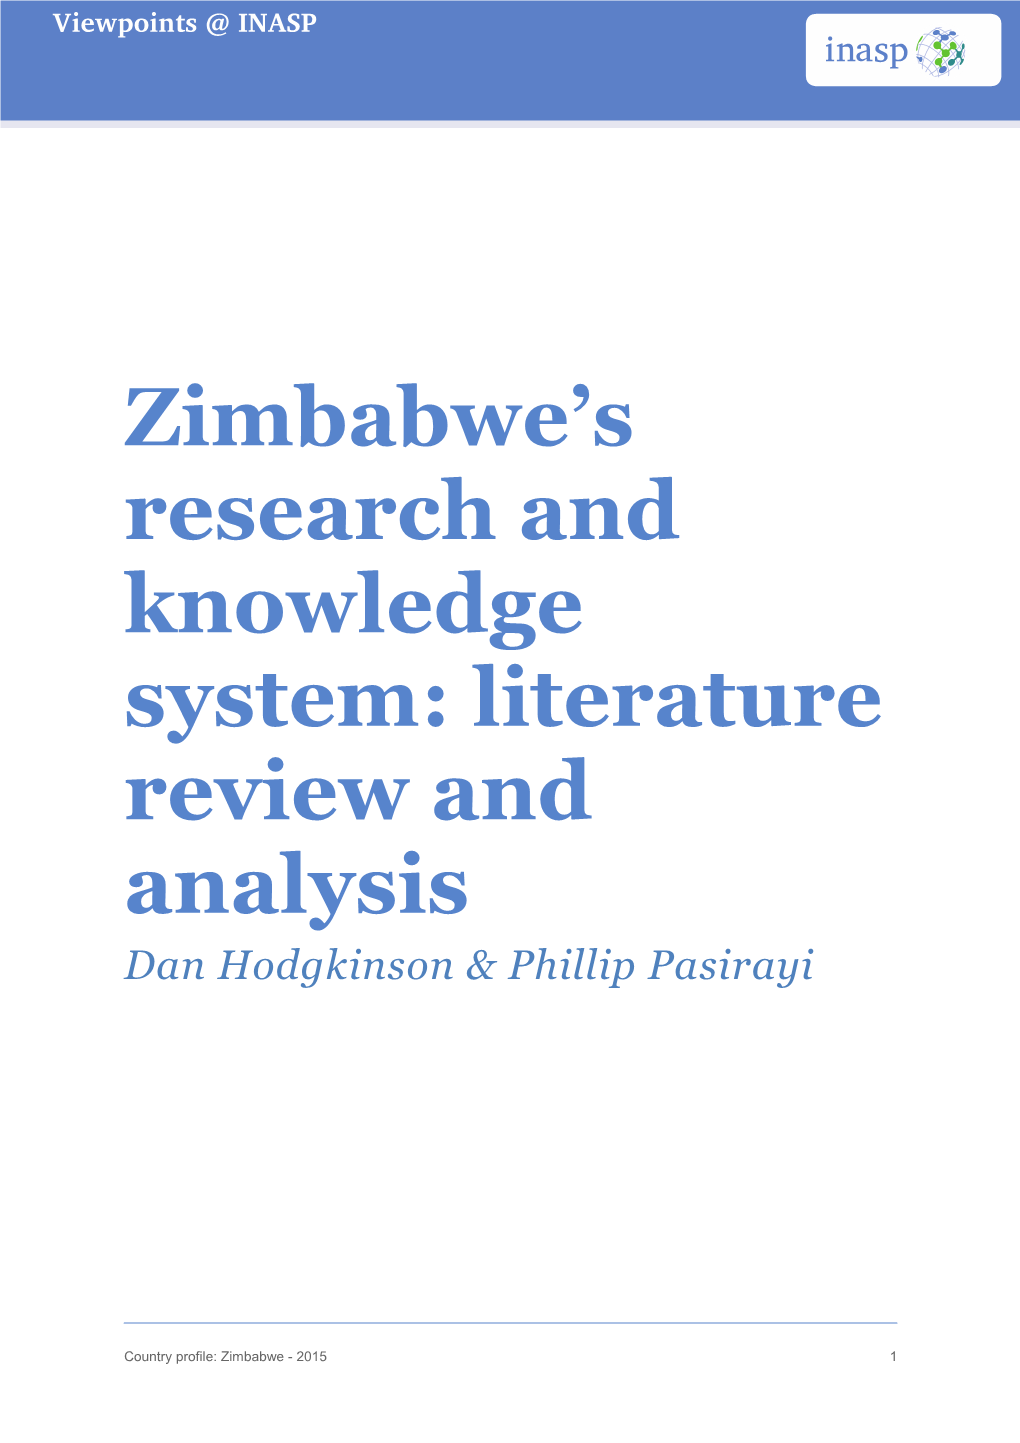 Zimbabwe’S Research and Knowledge System: Literature Review and Analysis Dan Hodgkinson & Phillip Pasirayi